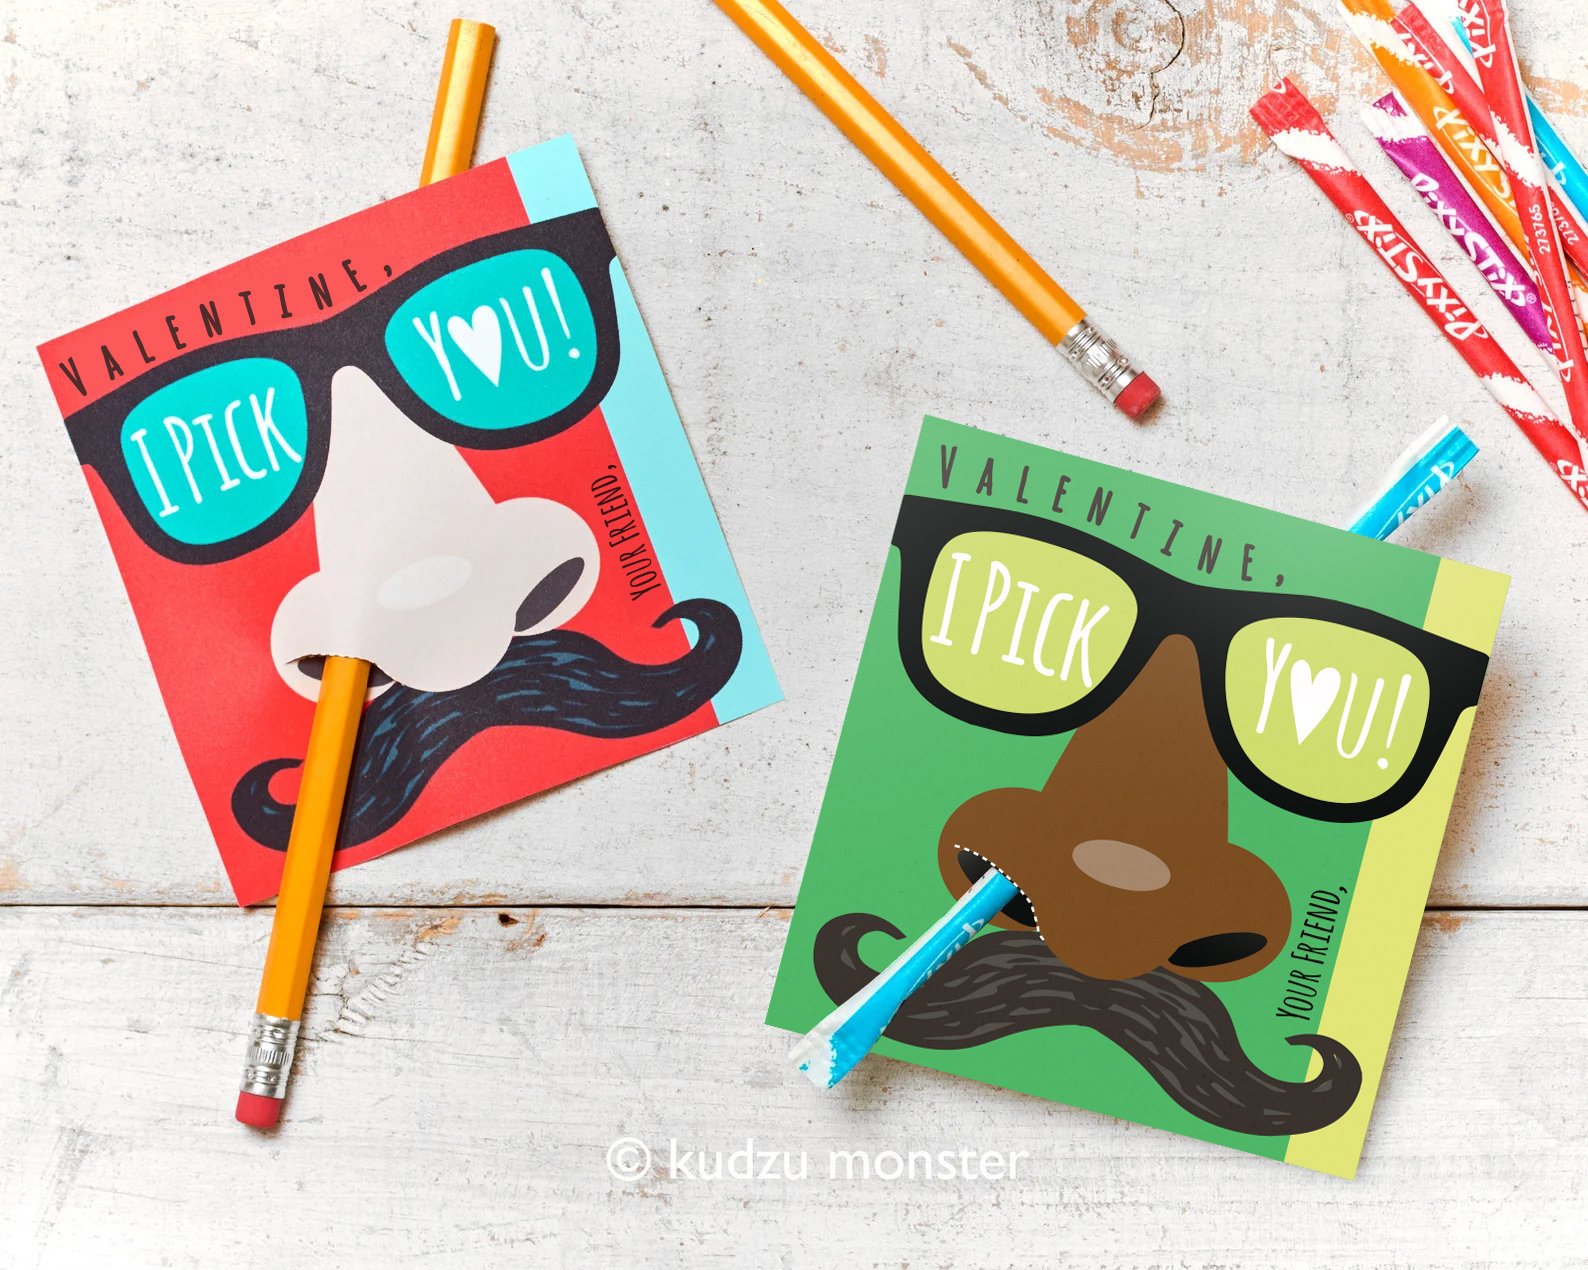 Kids Valentines Day Gifts, Funny Valentine Favor for Classroom Valentine  Exchange, Personalized Valentines With Pencil INCLUDED 